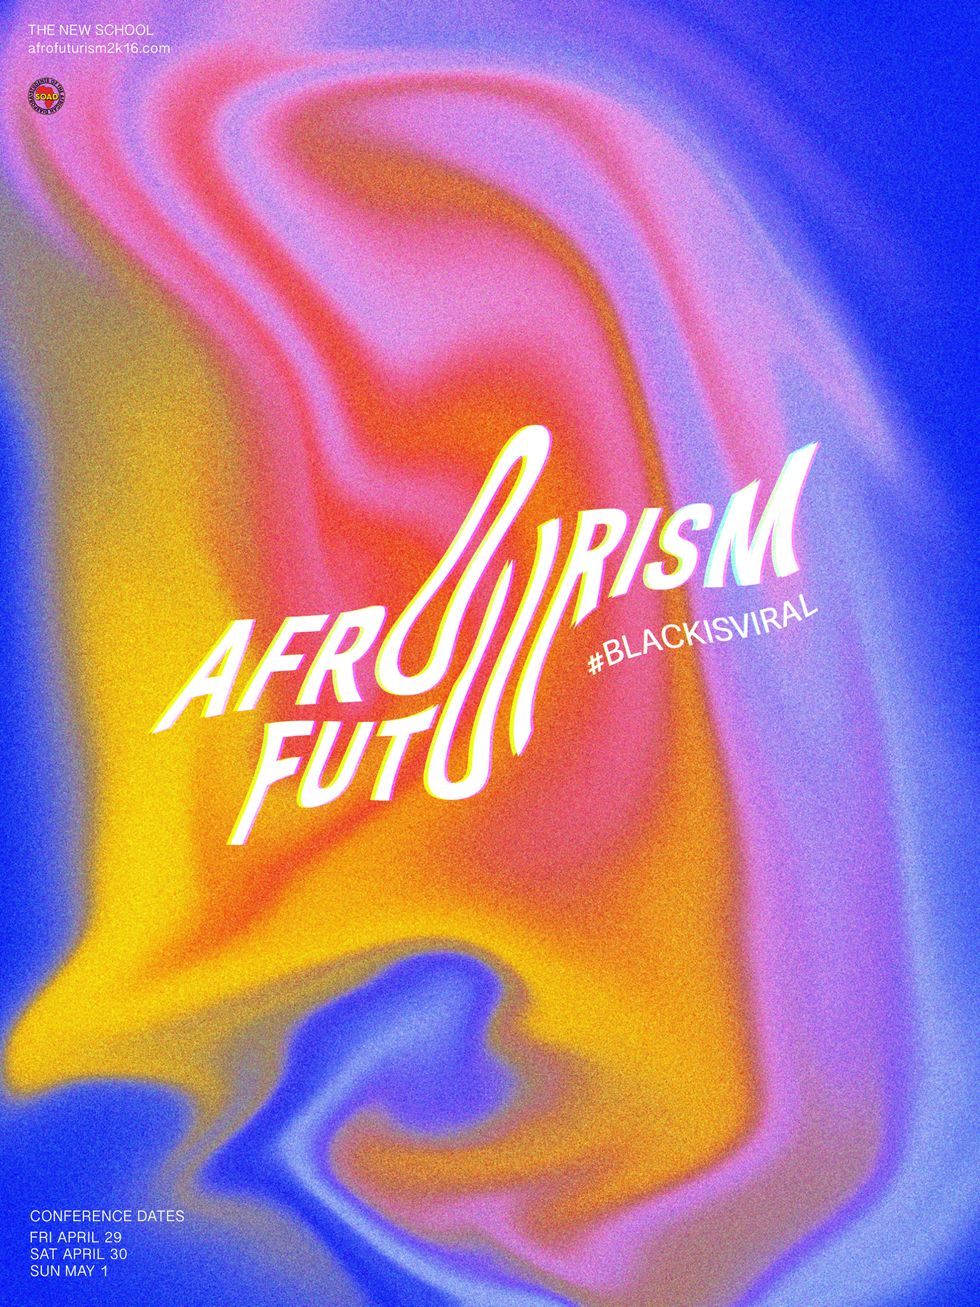 This Year's Afrofuturism Conference Is About Going Viral While Black